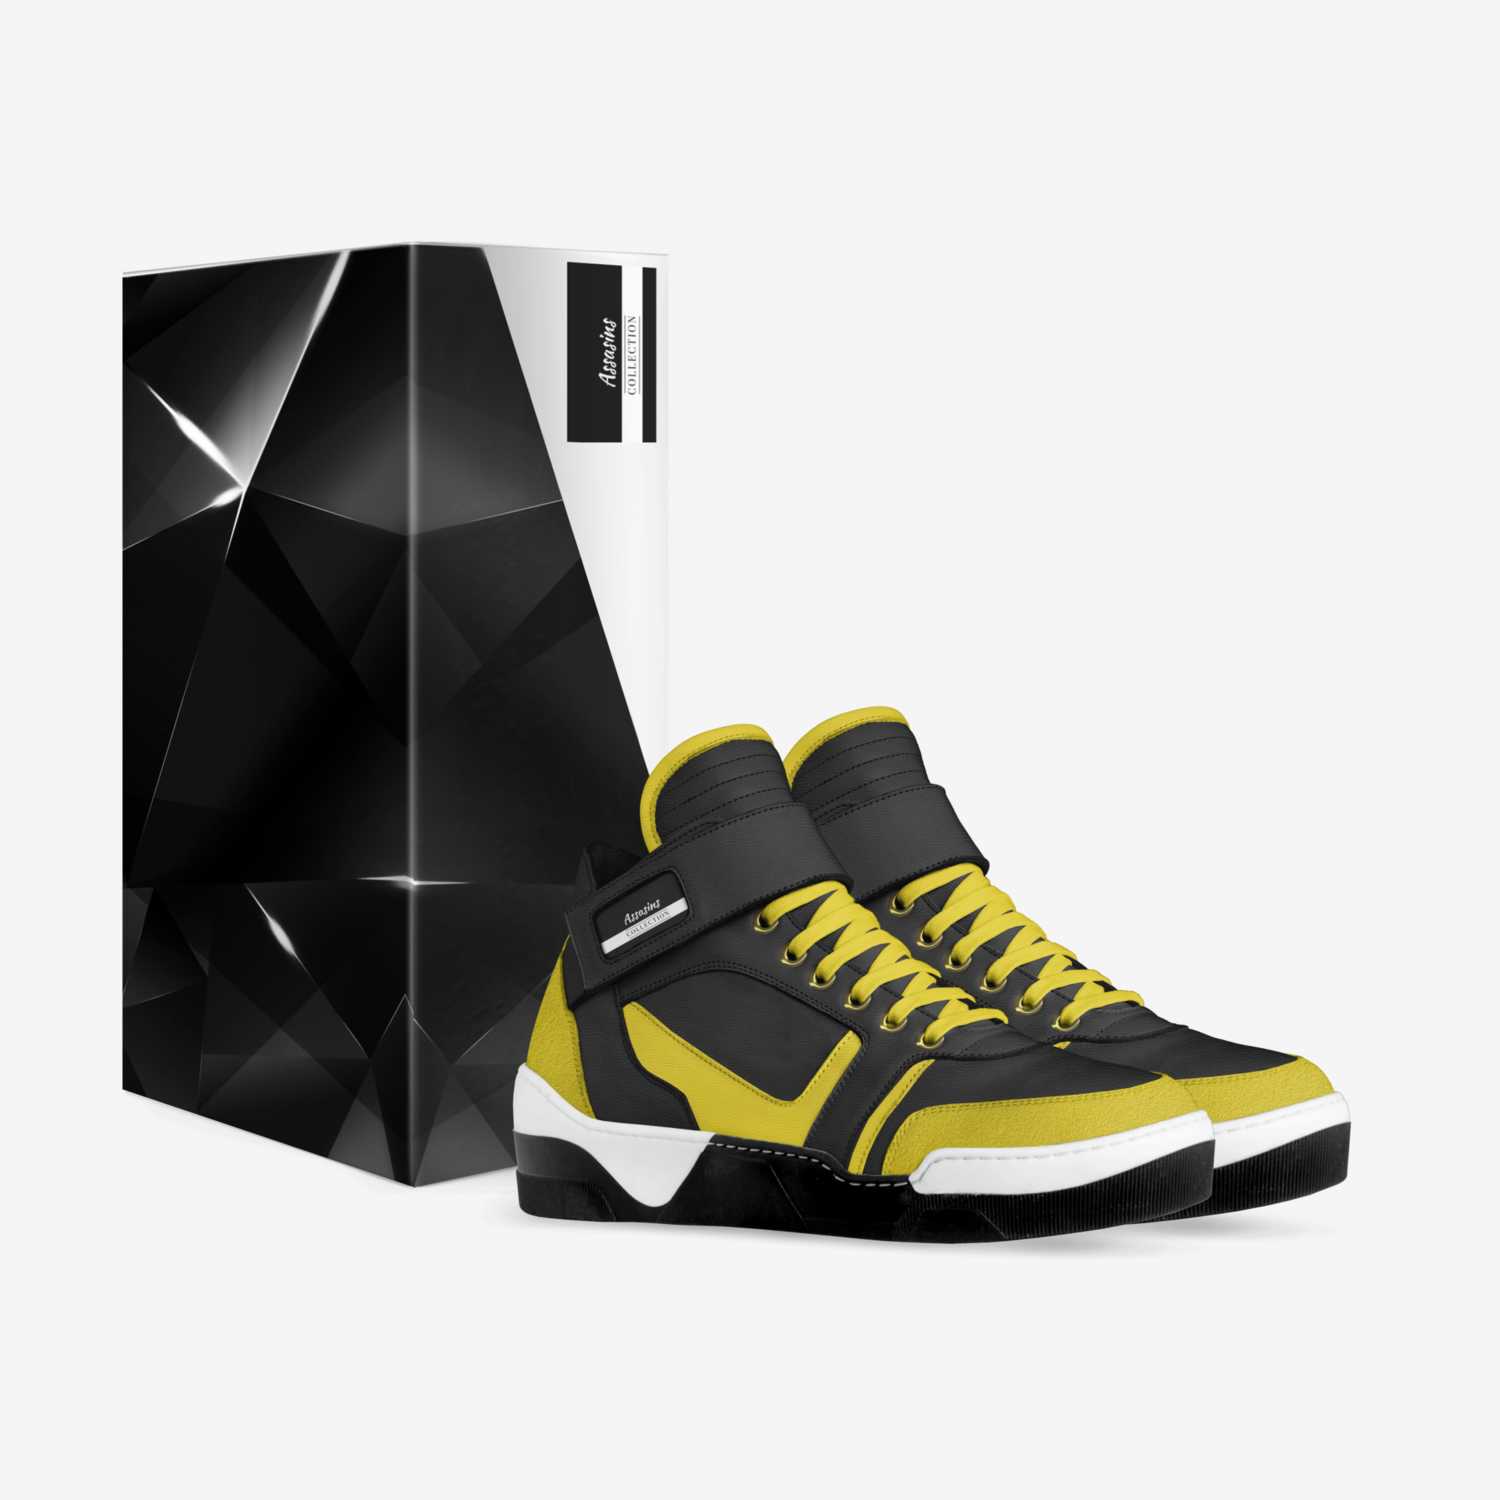 Assasins custom made in Italy shoes by Andrew Hoyle | Box view